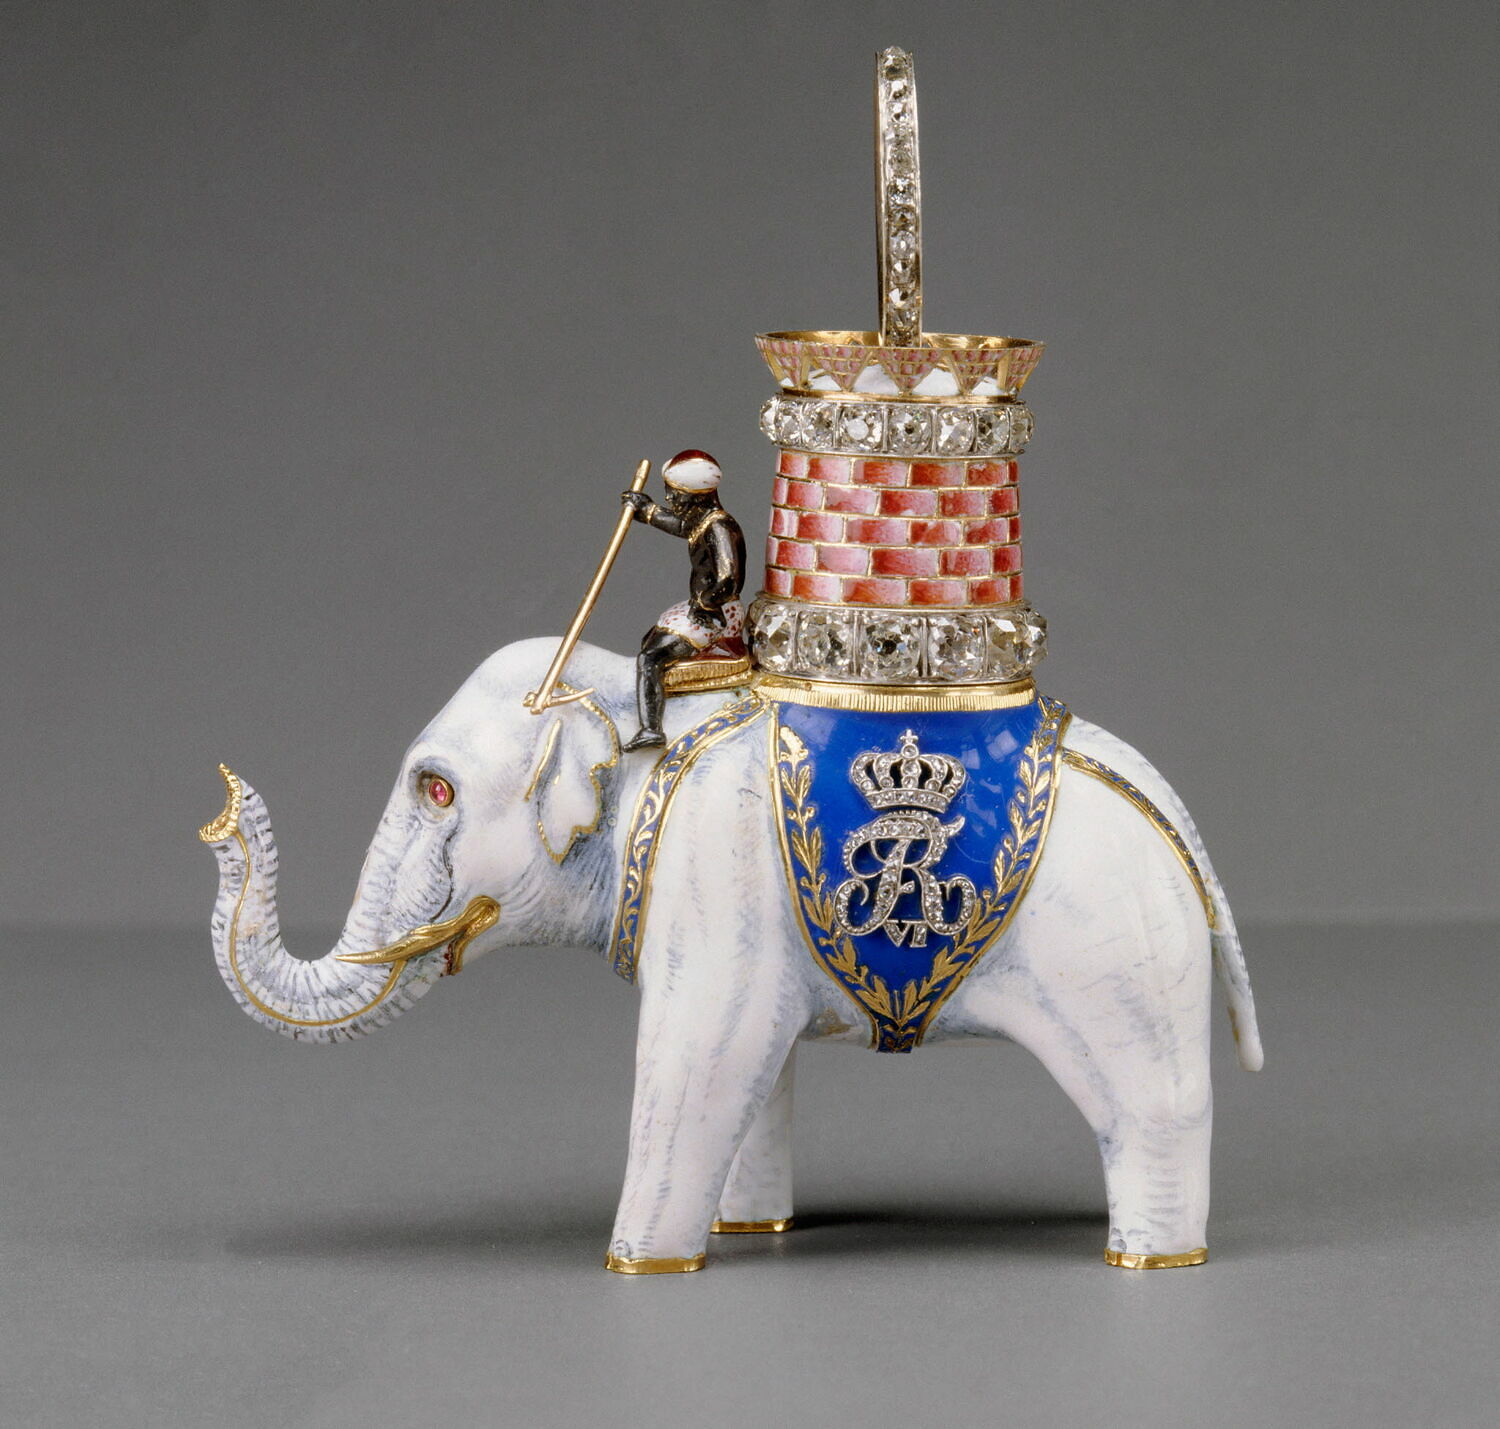 Louis  XVIII Order of the Elephant from the Louvre collection.JPG